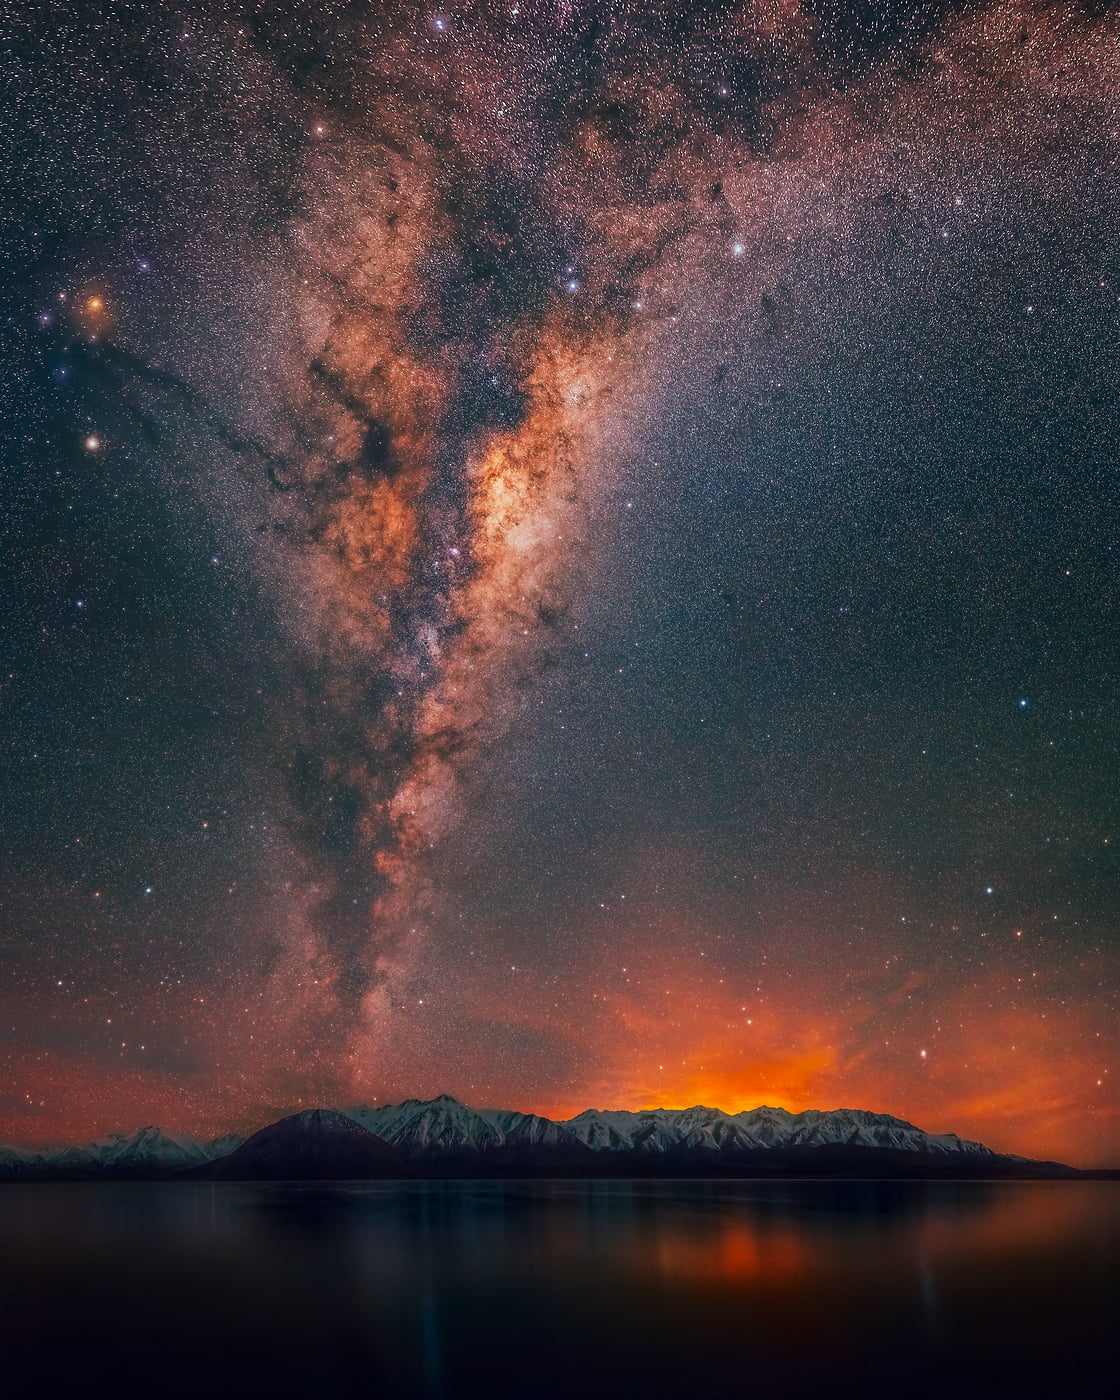 477 megapixels! A very high resolution, large-format VAST photo print of the night sky, milky way, and stars over mountains and a lake; fine art astrophotography landscape photo created by Paul Wilson in Lake Heron, New Zealand